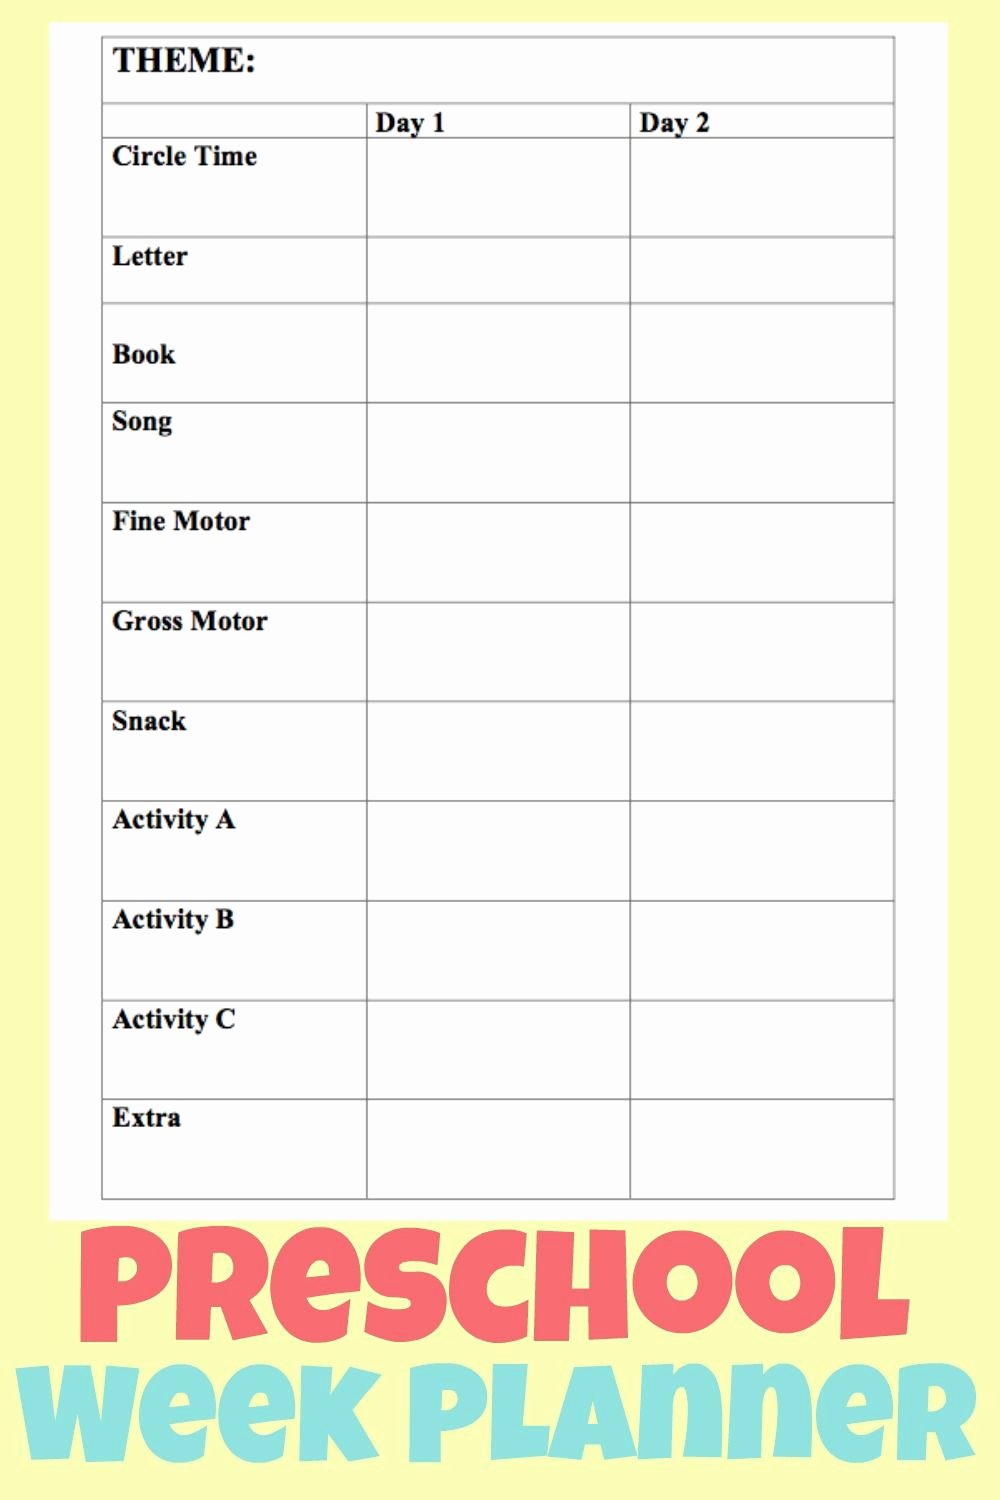 Daily Lesson Plan for Preschool Awesome Make Planning Your Home Preschool Week Simple with This